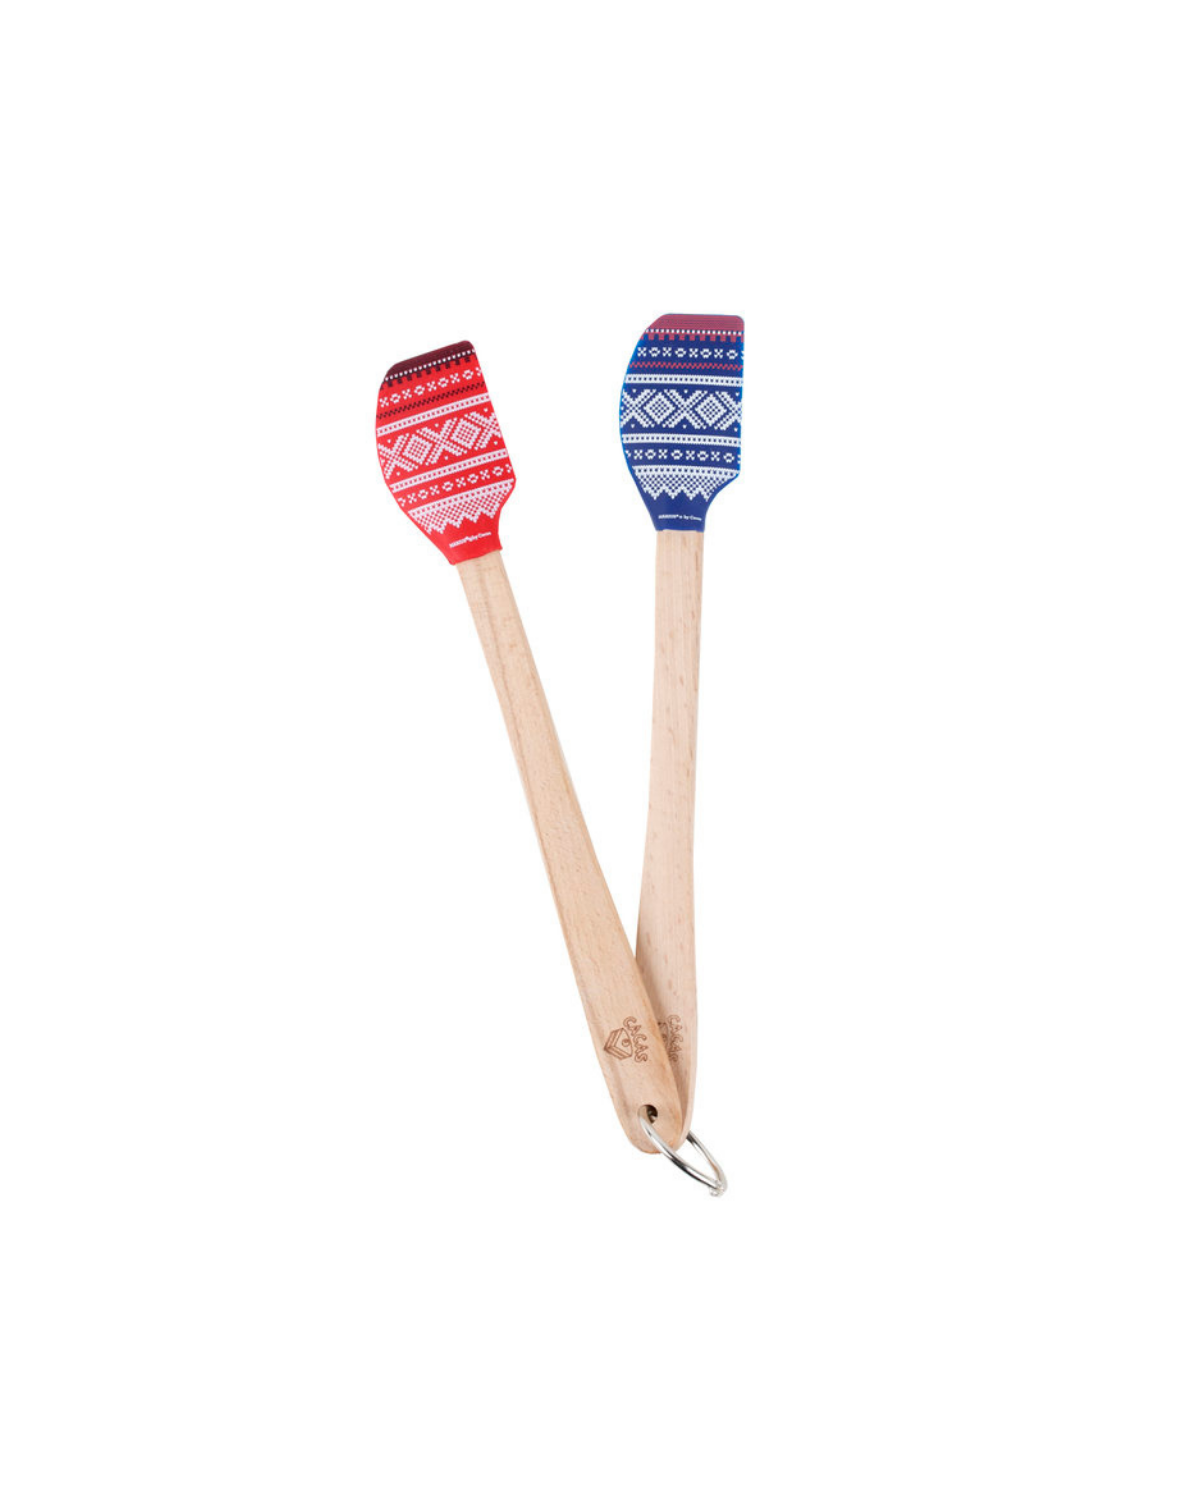 Marius Patterned Mini Spatula Set with Best Selling Norwegian Sweater  design — Nordic Gift House